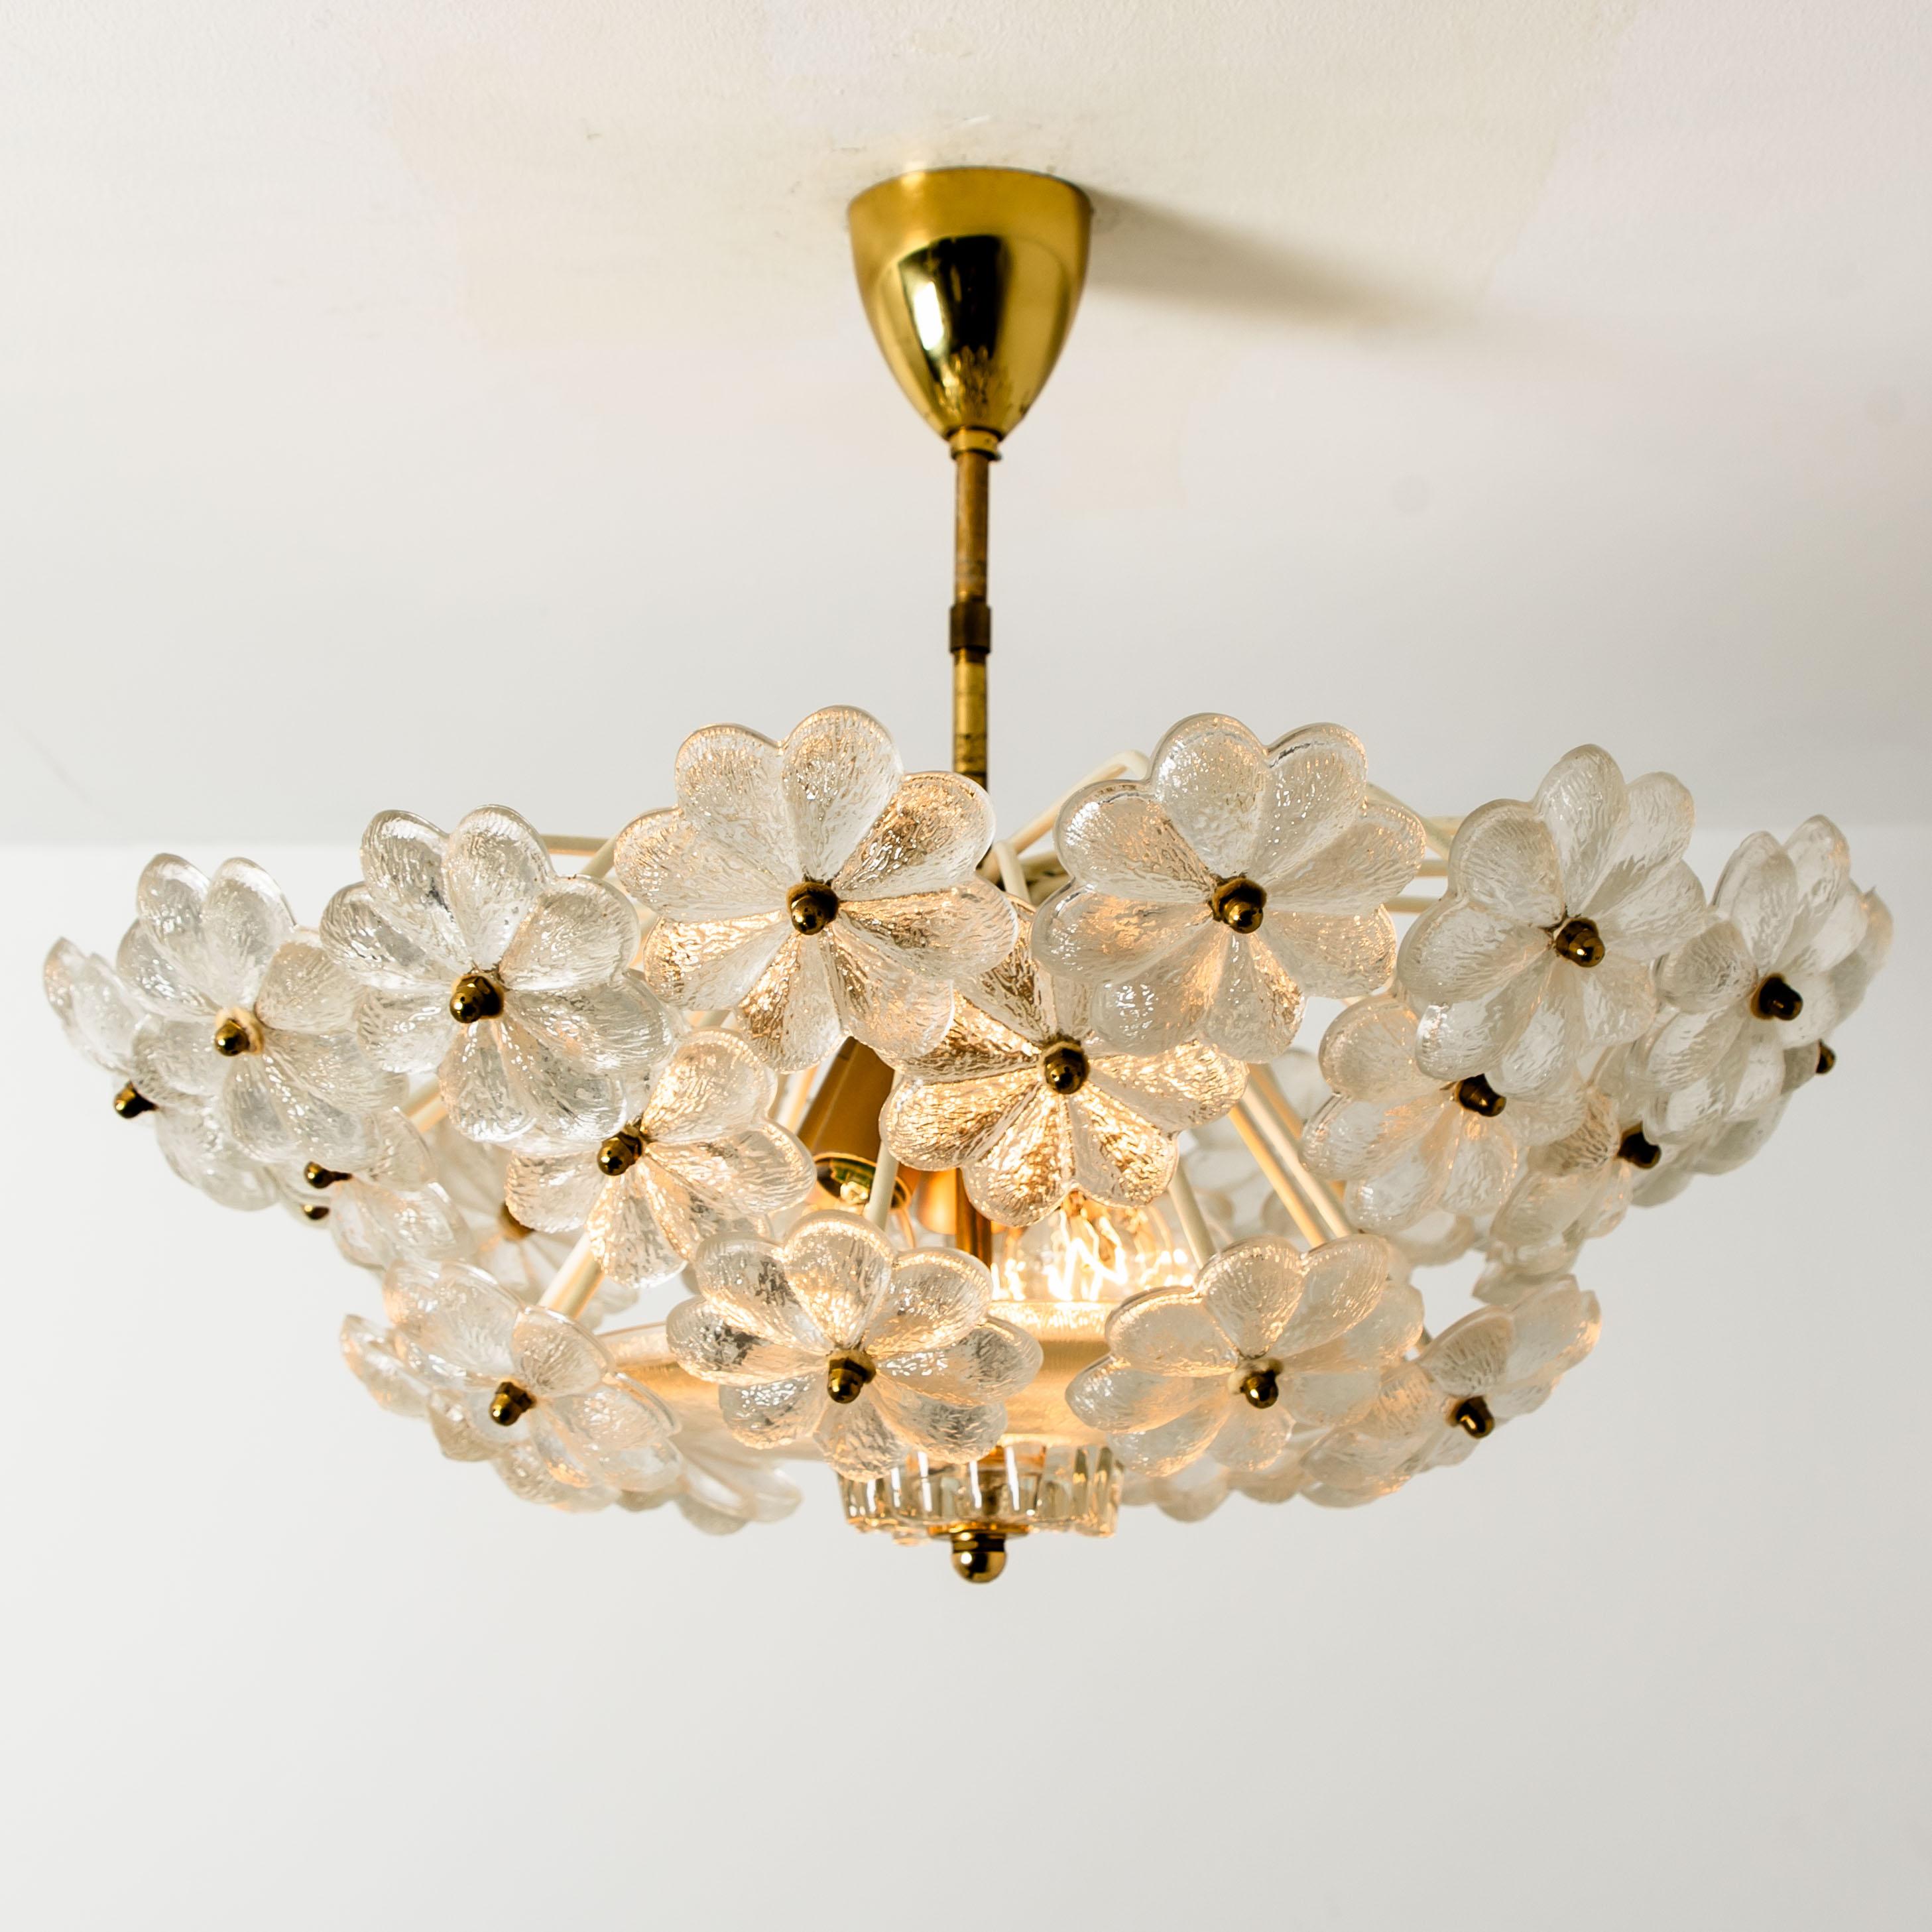 These sculptural chandelier has the design of a bouquet of textured glass flowers and are from the historical lighting company Ernst Palme.

Each clear glass flower shade has textured petals and is securely screwed in place to the white frame. The